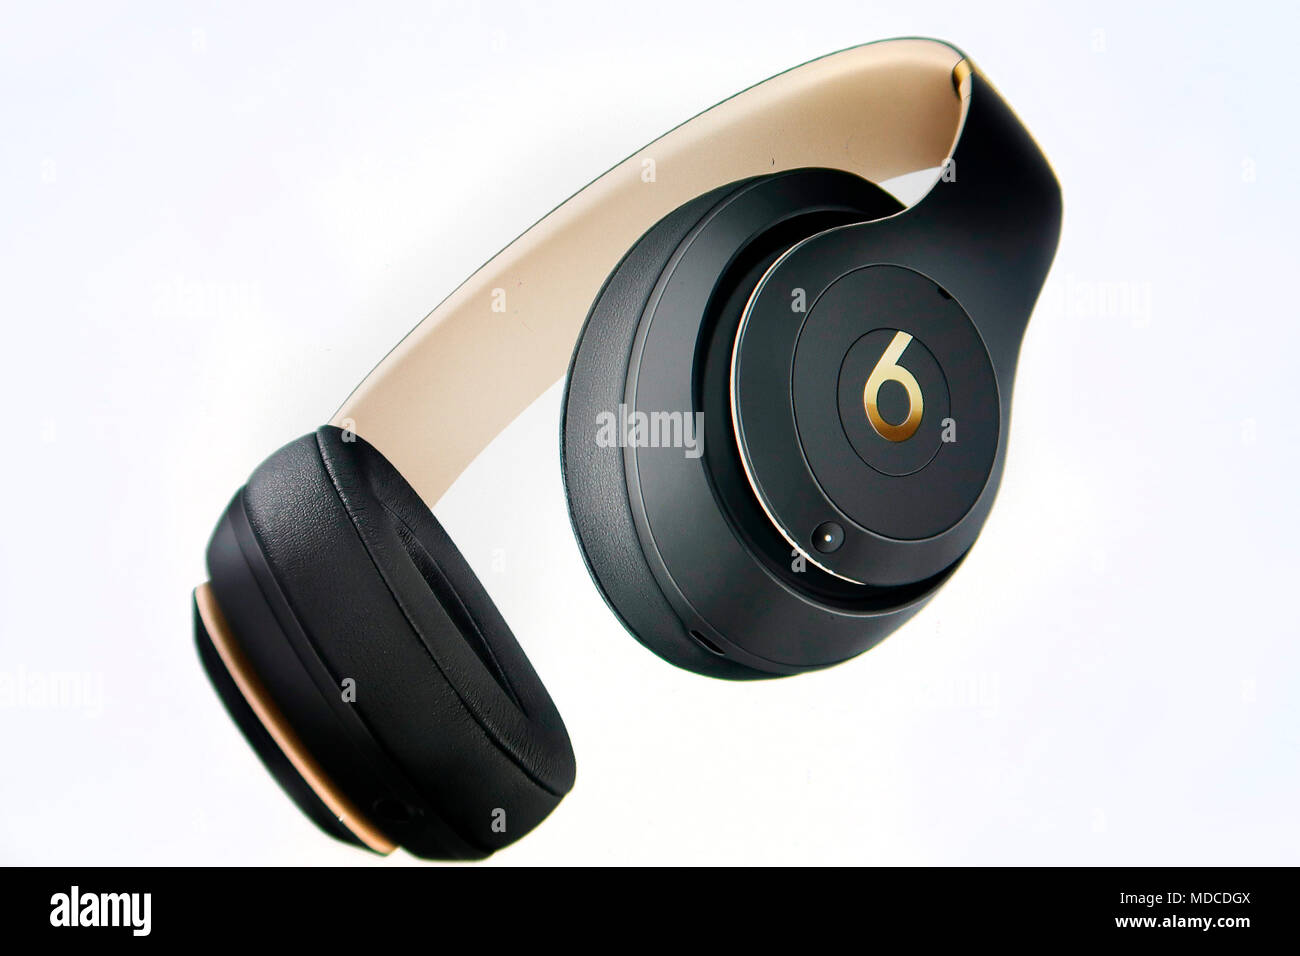 Iconic Beats Headphones by Dr Dre Stock Photo